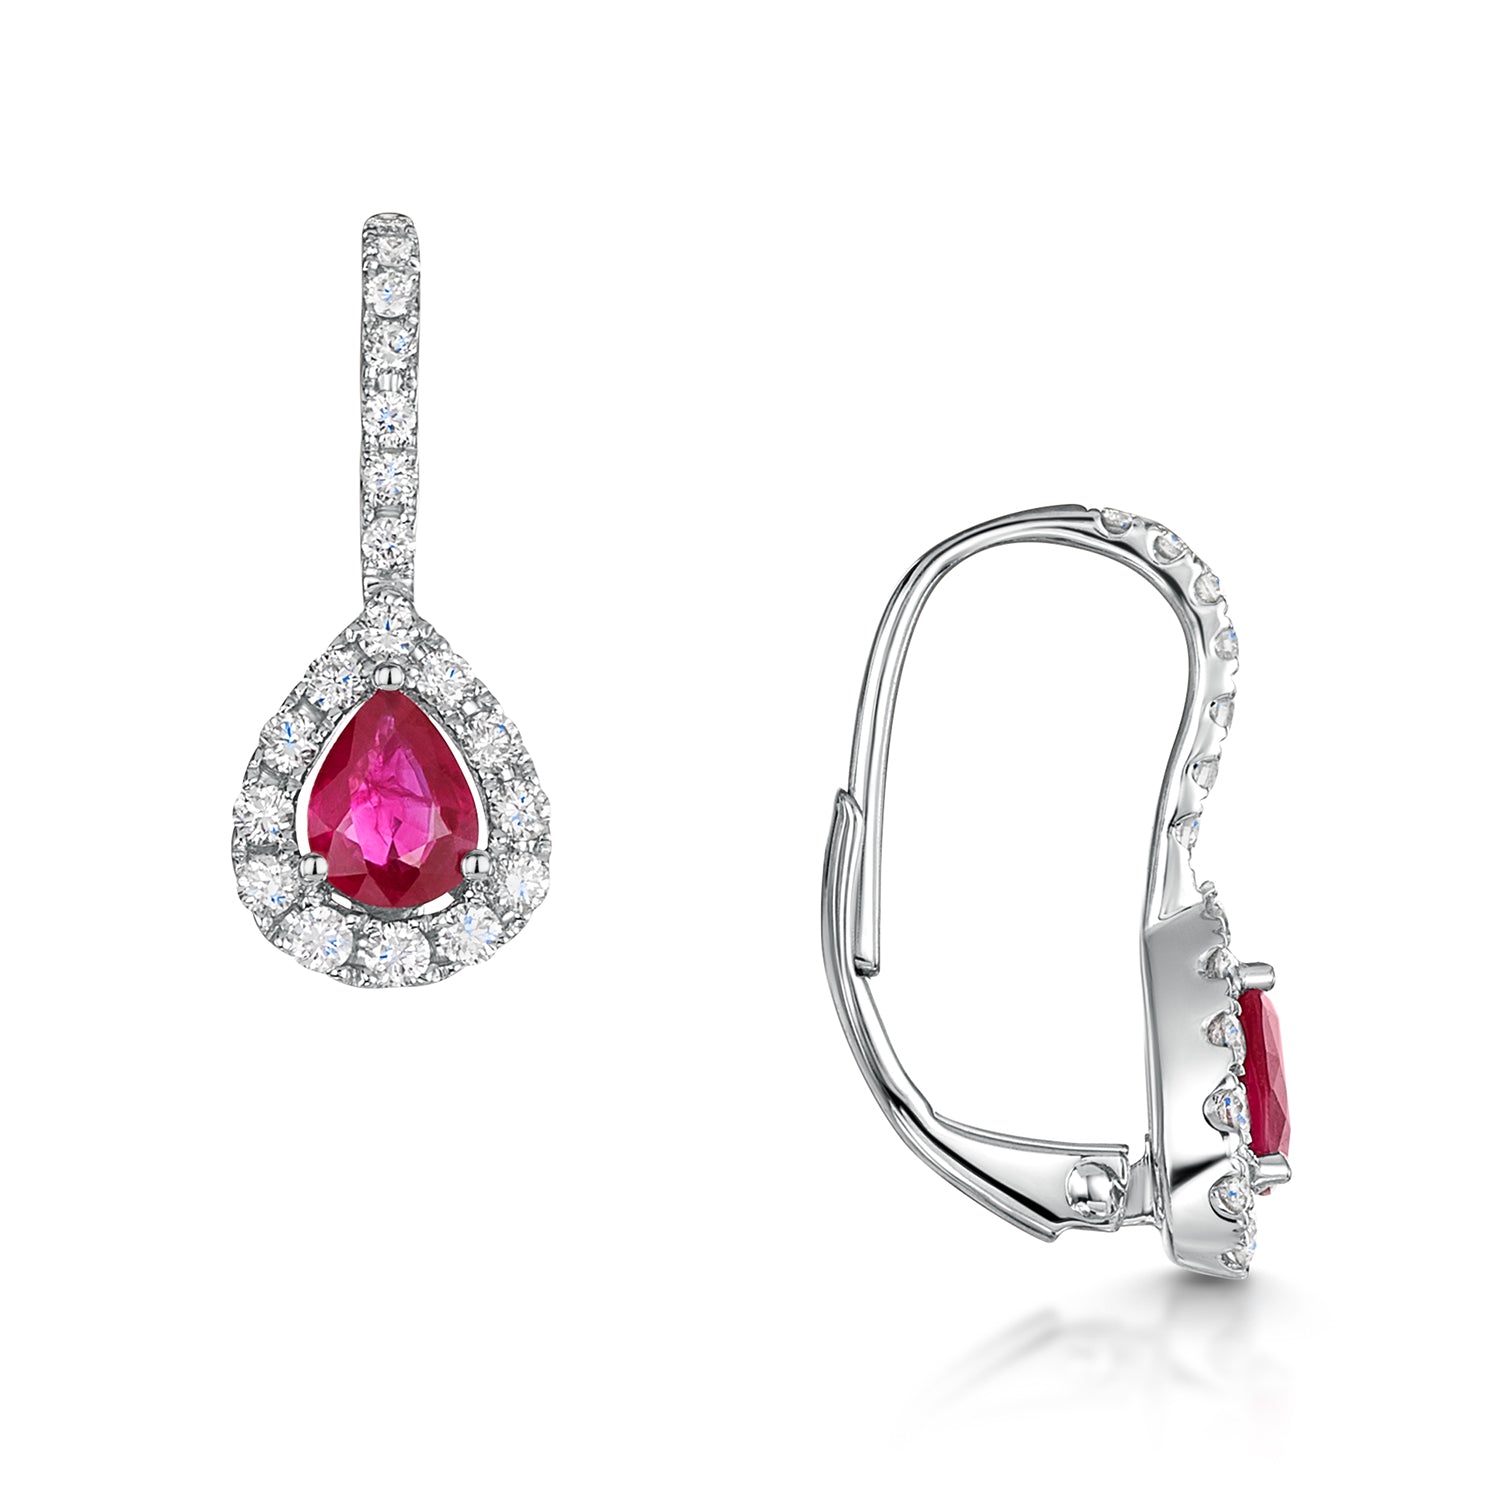 18ct White Gold Pear Shape Ruby And Round Brilliant Cut Diamond Halo Drop Earrings